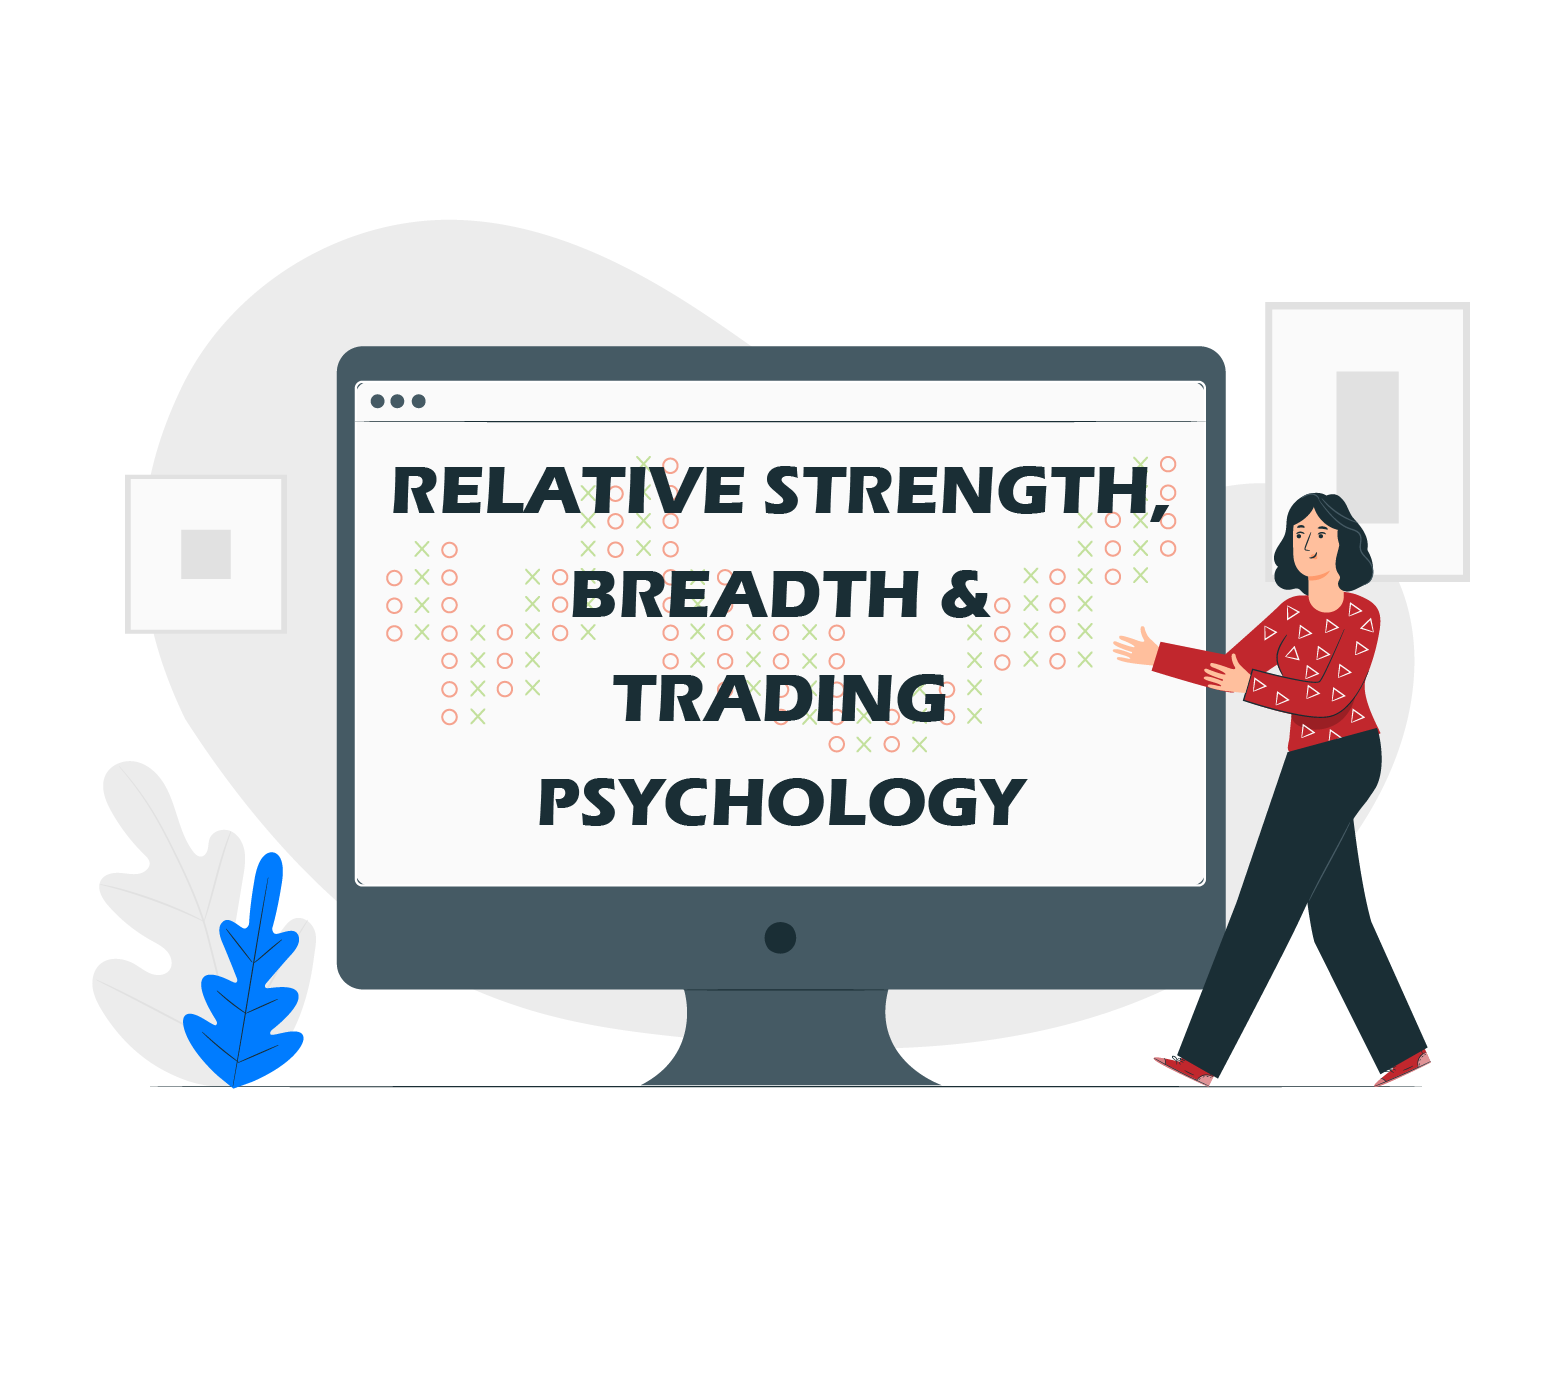 Relative Strength, Breadth & Trading Psychology